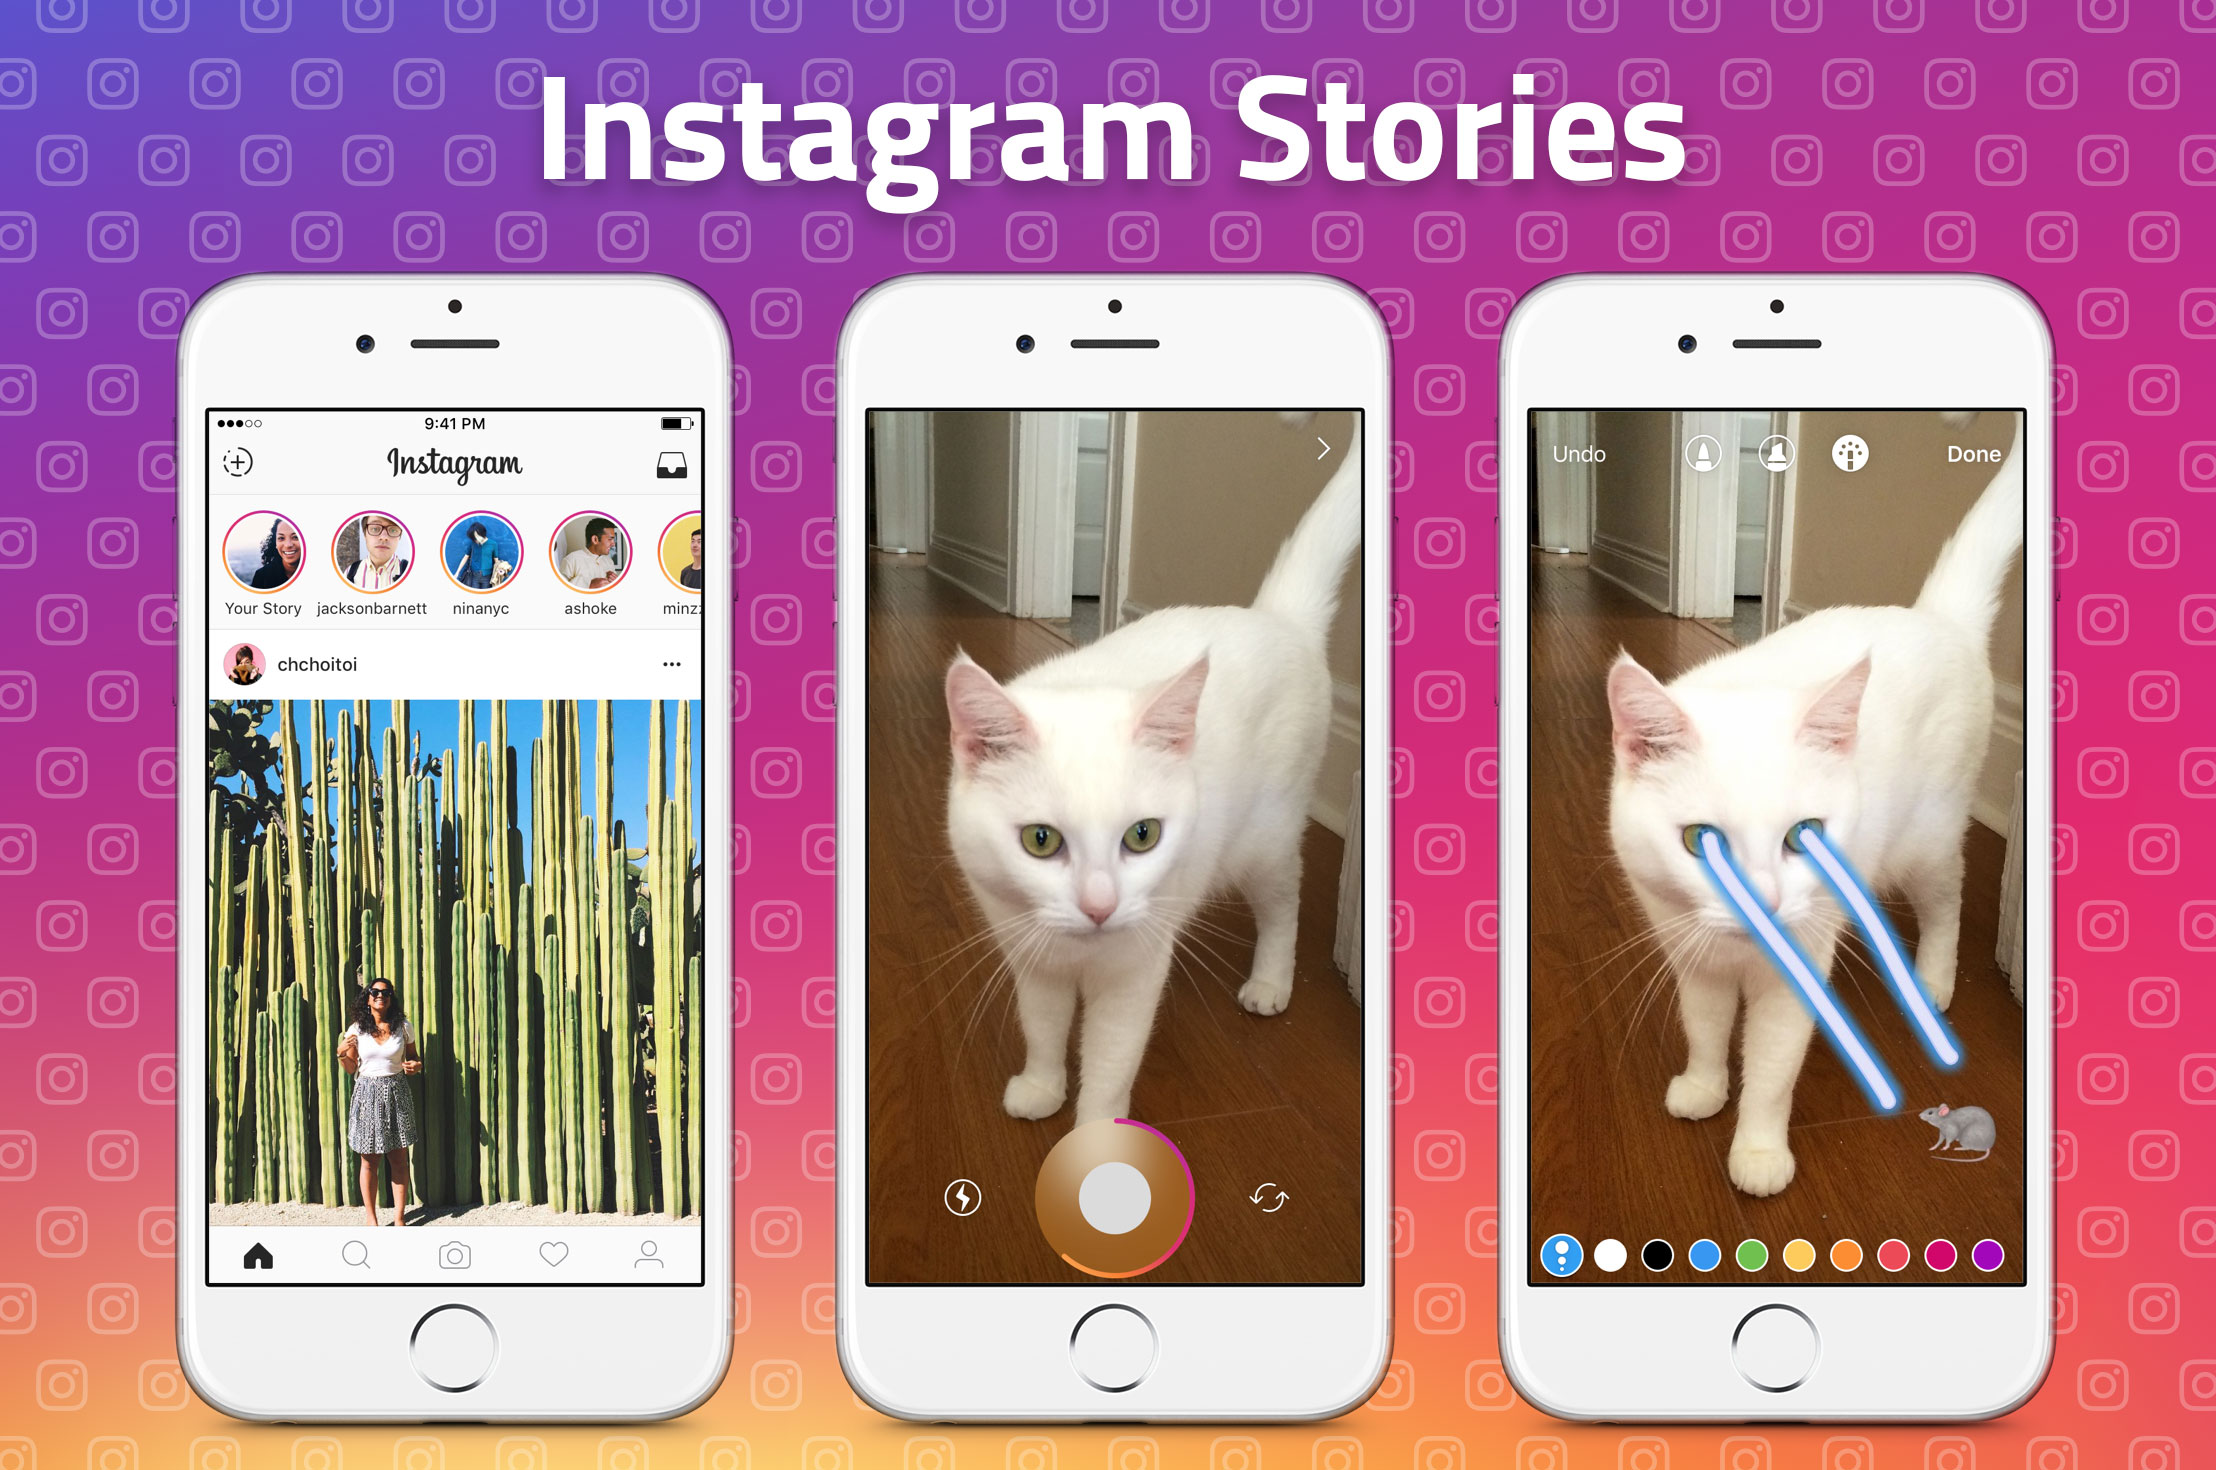 Instagram launches “Stories,” a Snapchatty feature for imperfect sharing | TechCrunch